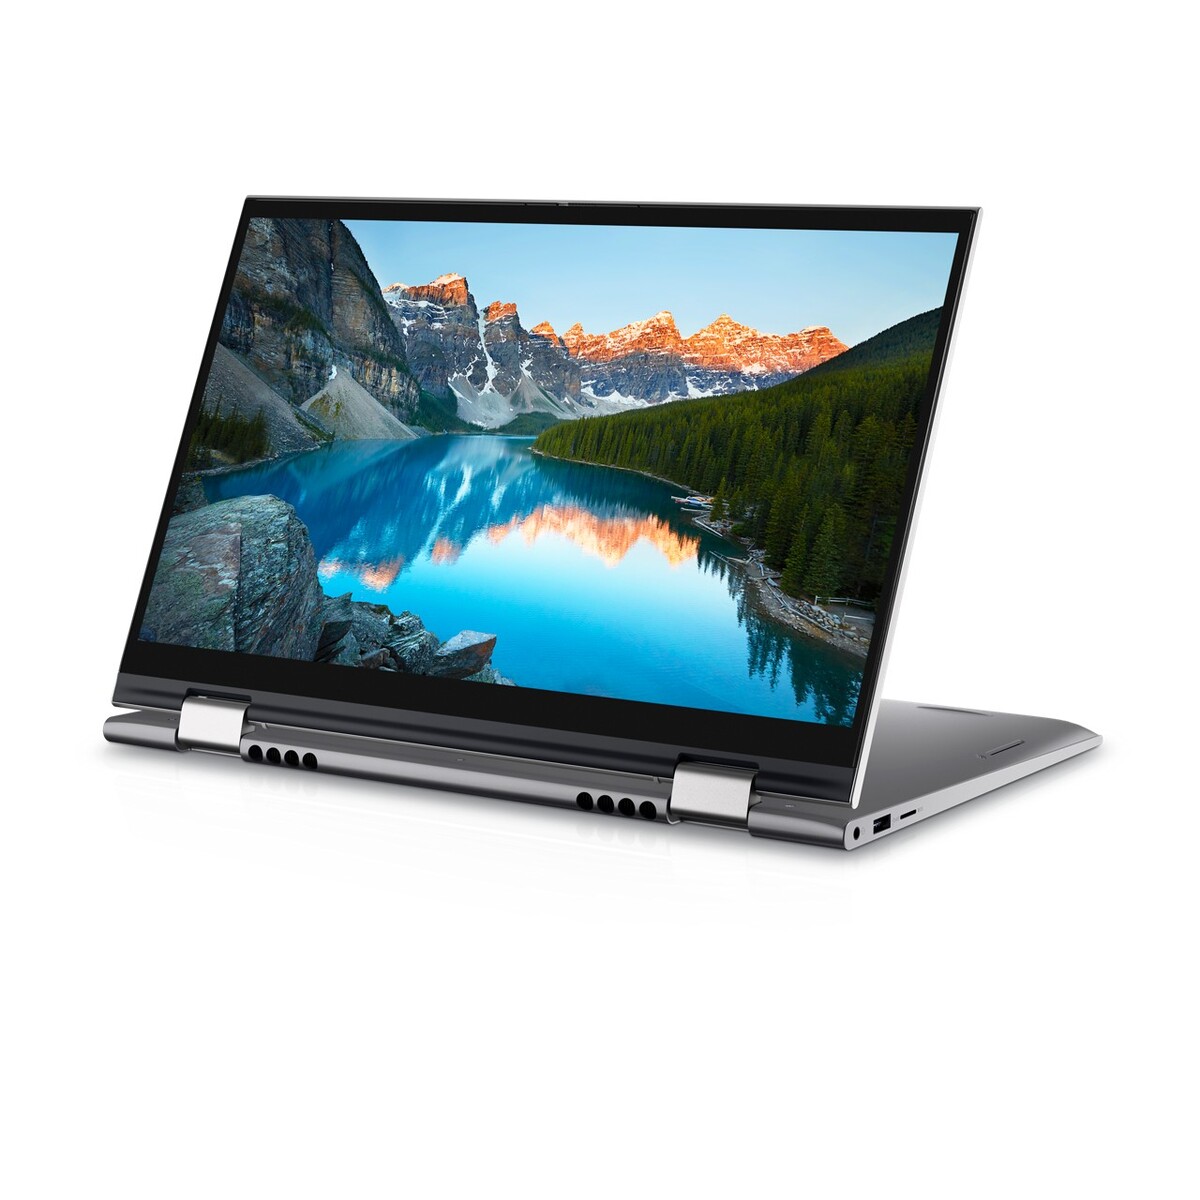 Dell launches Inspiron 14 7415 2-in-1 with AMD Ryzen 5000U processors